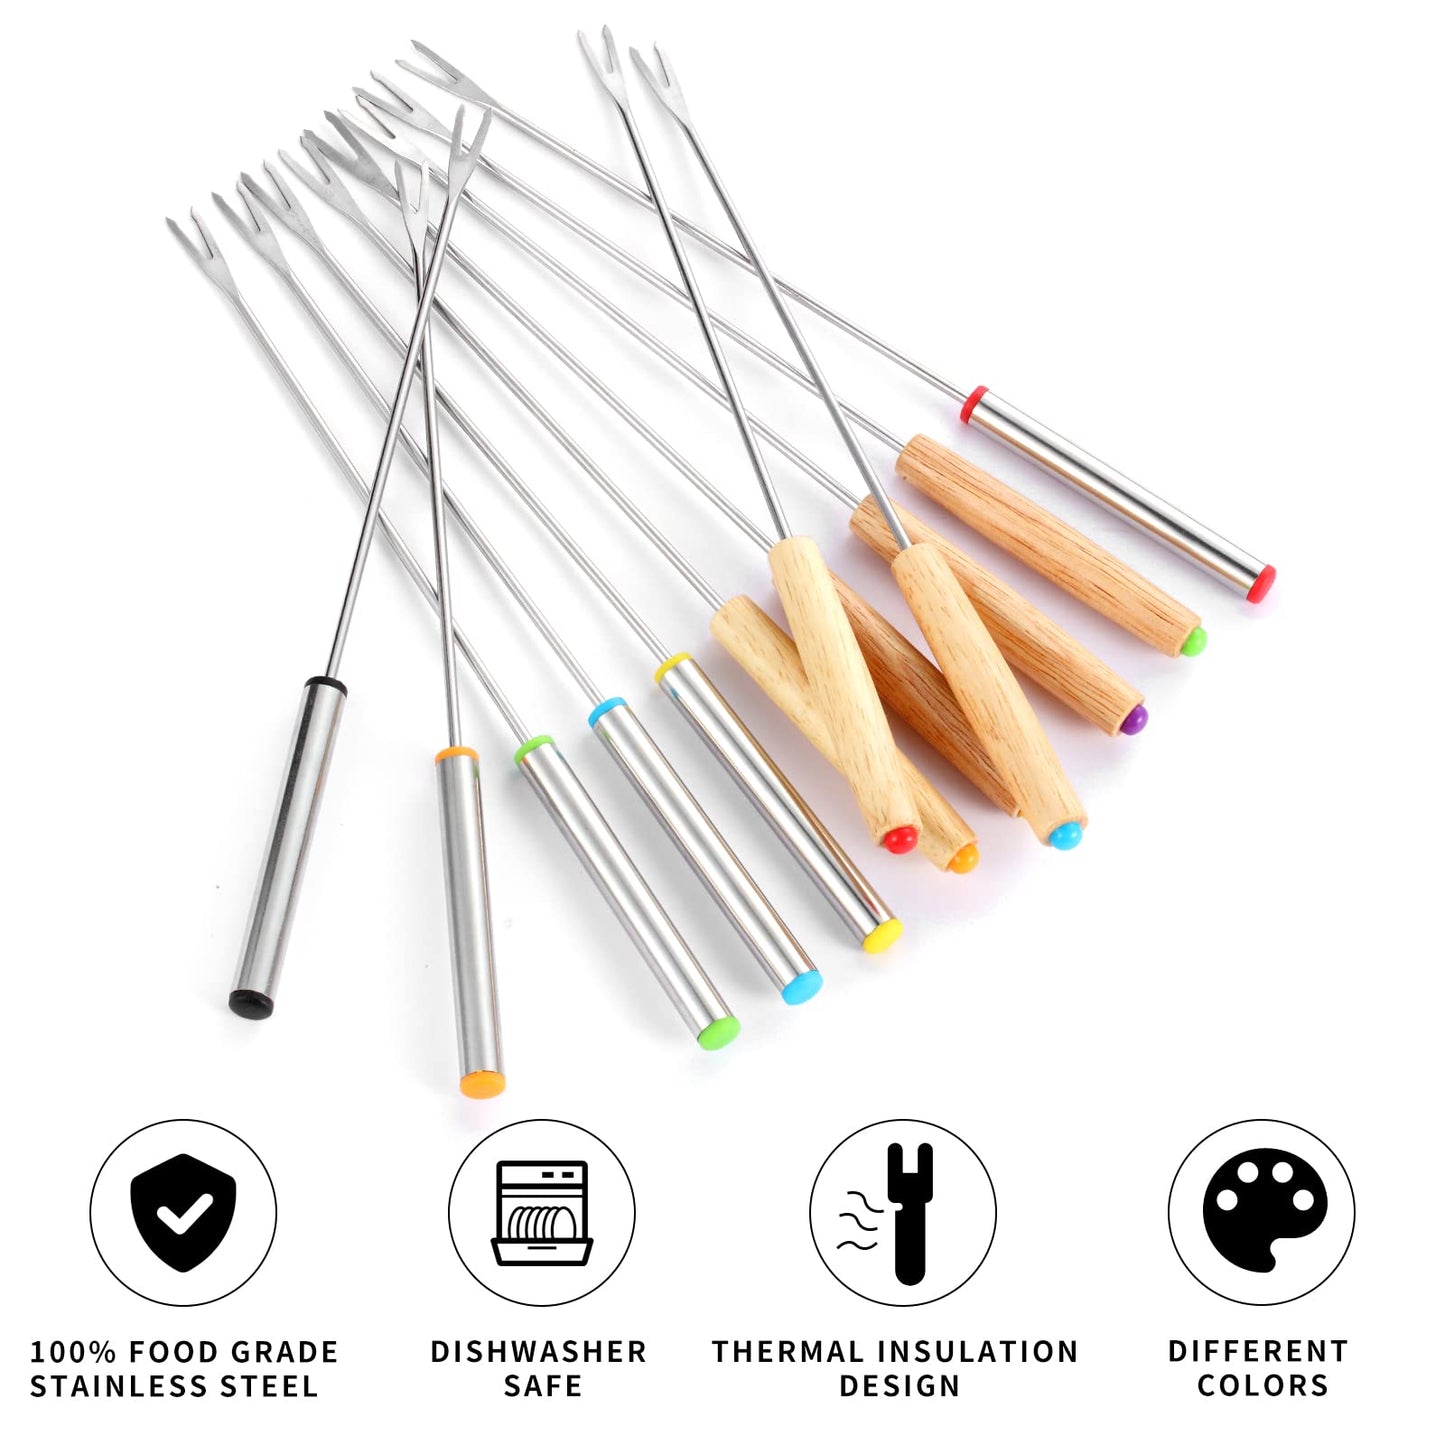 24 Pack 9.6 Inch Stainless Steel Fondue Forks, 12 Wood Handles and 12 Stainless Steel Handles, Heat Resistant Smores Sticks for Roast Meat Chocolate Dessert Cheese Marshmallows (6 Colors)